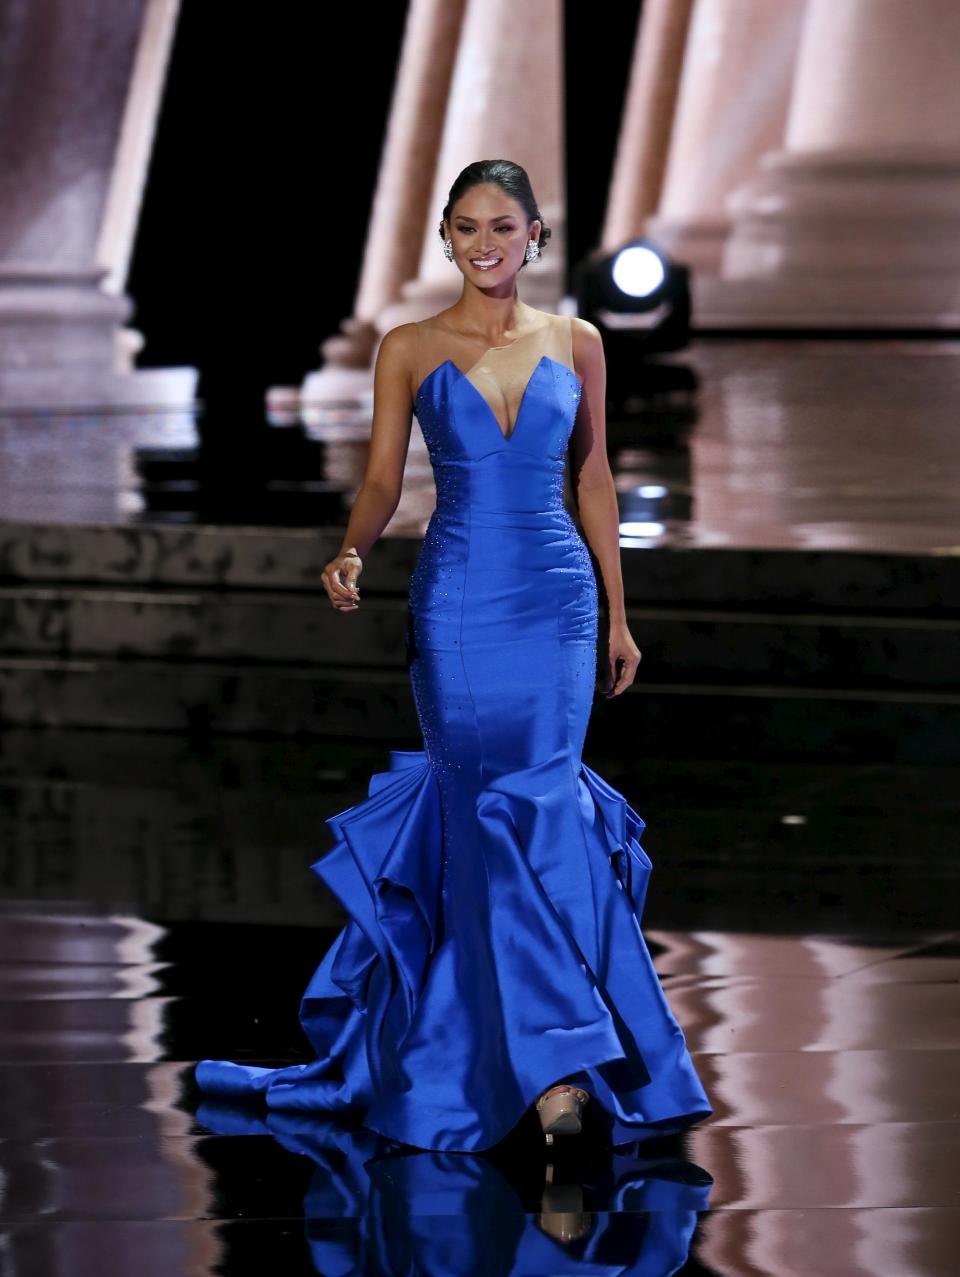 Miss Philippines Pia Alonzo Wurtzbach competes in the evening gown competition during the 2015 Miss Universe Pageant in Las Vegas, Nevada December 20, 2015. Wurtzbach was later crowned Miss Universe. REUTERS/Steve Marcus ATTENTION EDITORS - FOR EDITORIAL USE ONLY. NOT FOR SALE FOR MARKETING OR ADVERTISING CAMPAIGNS